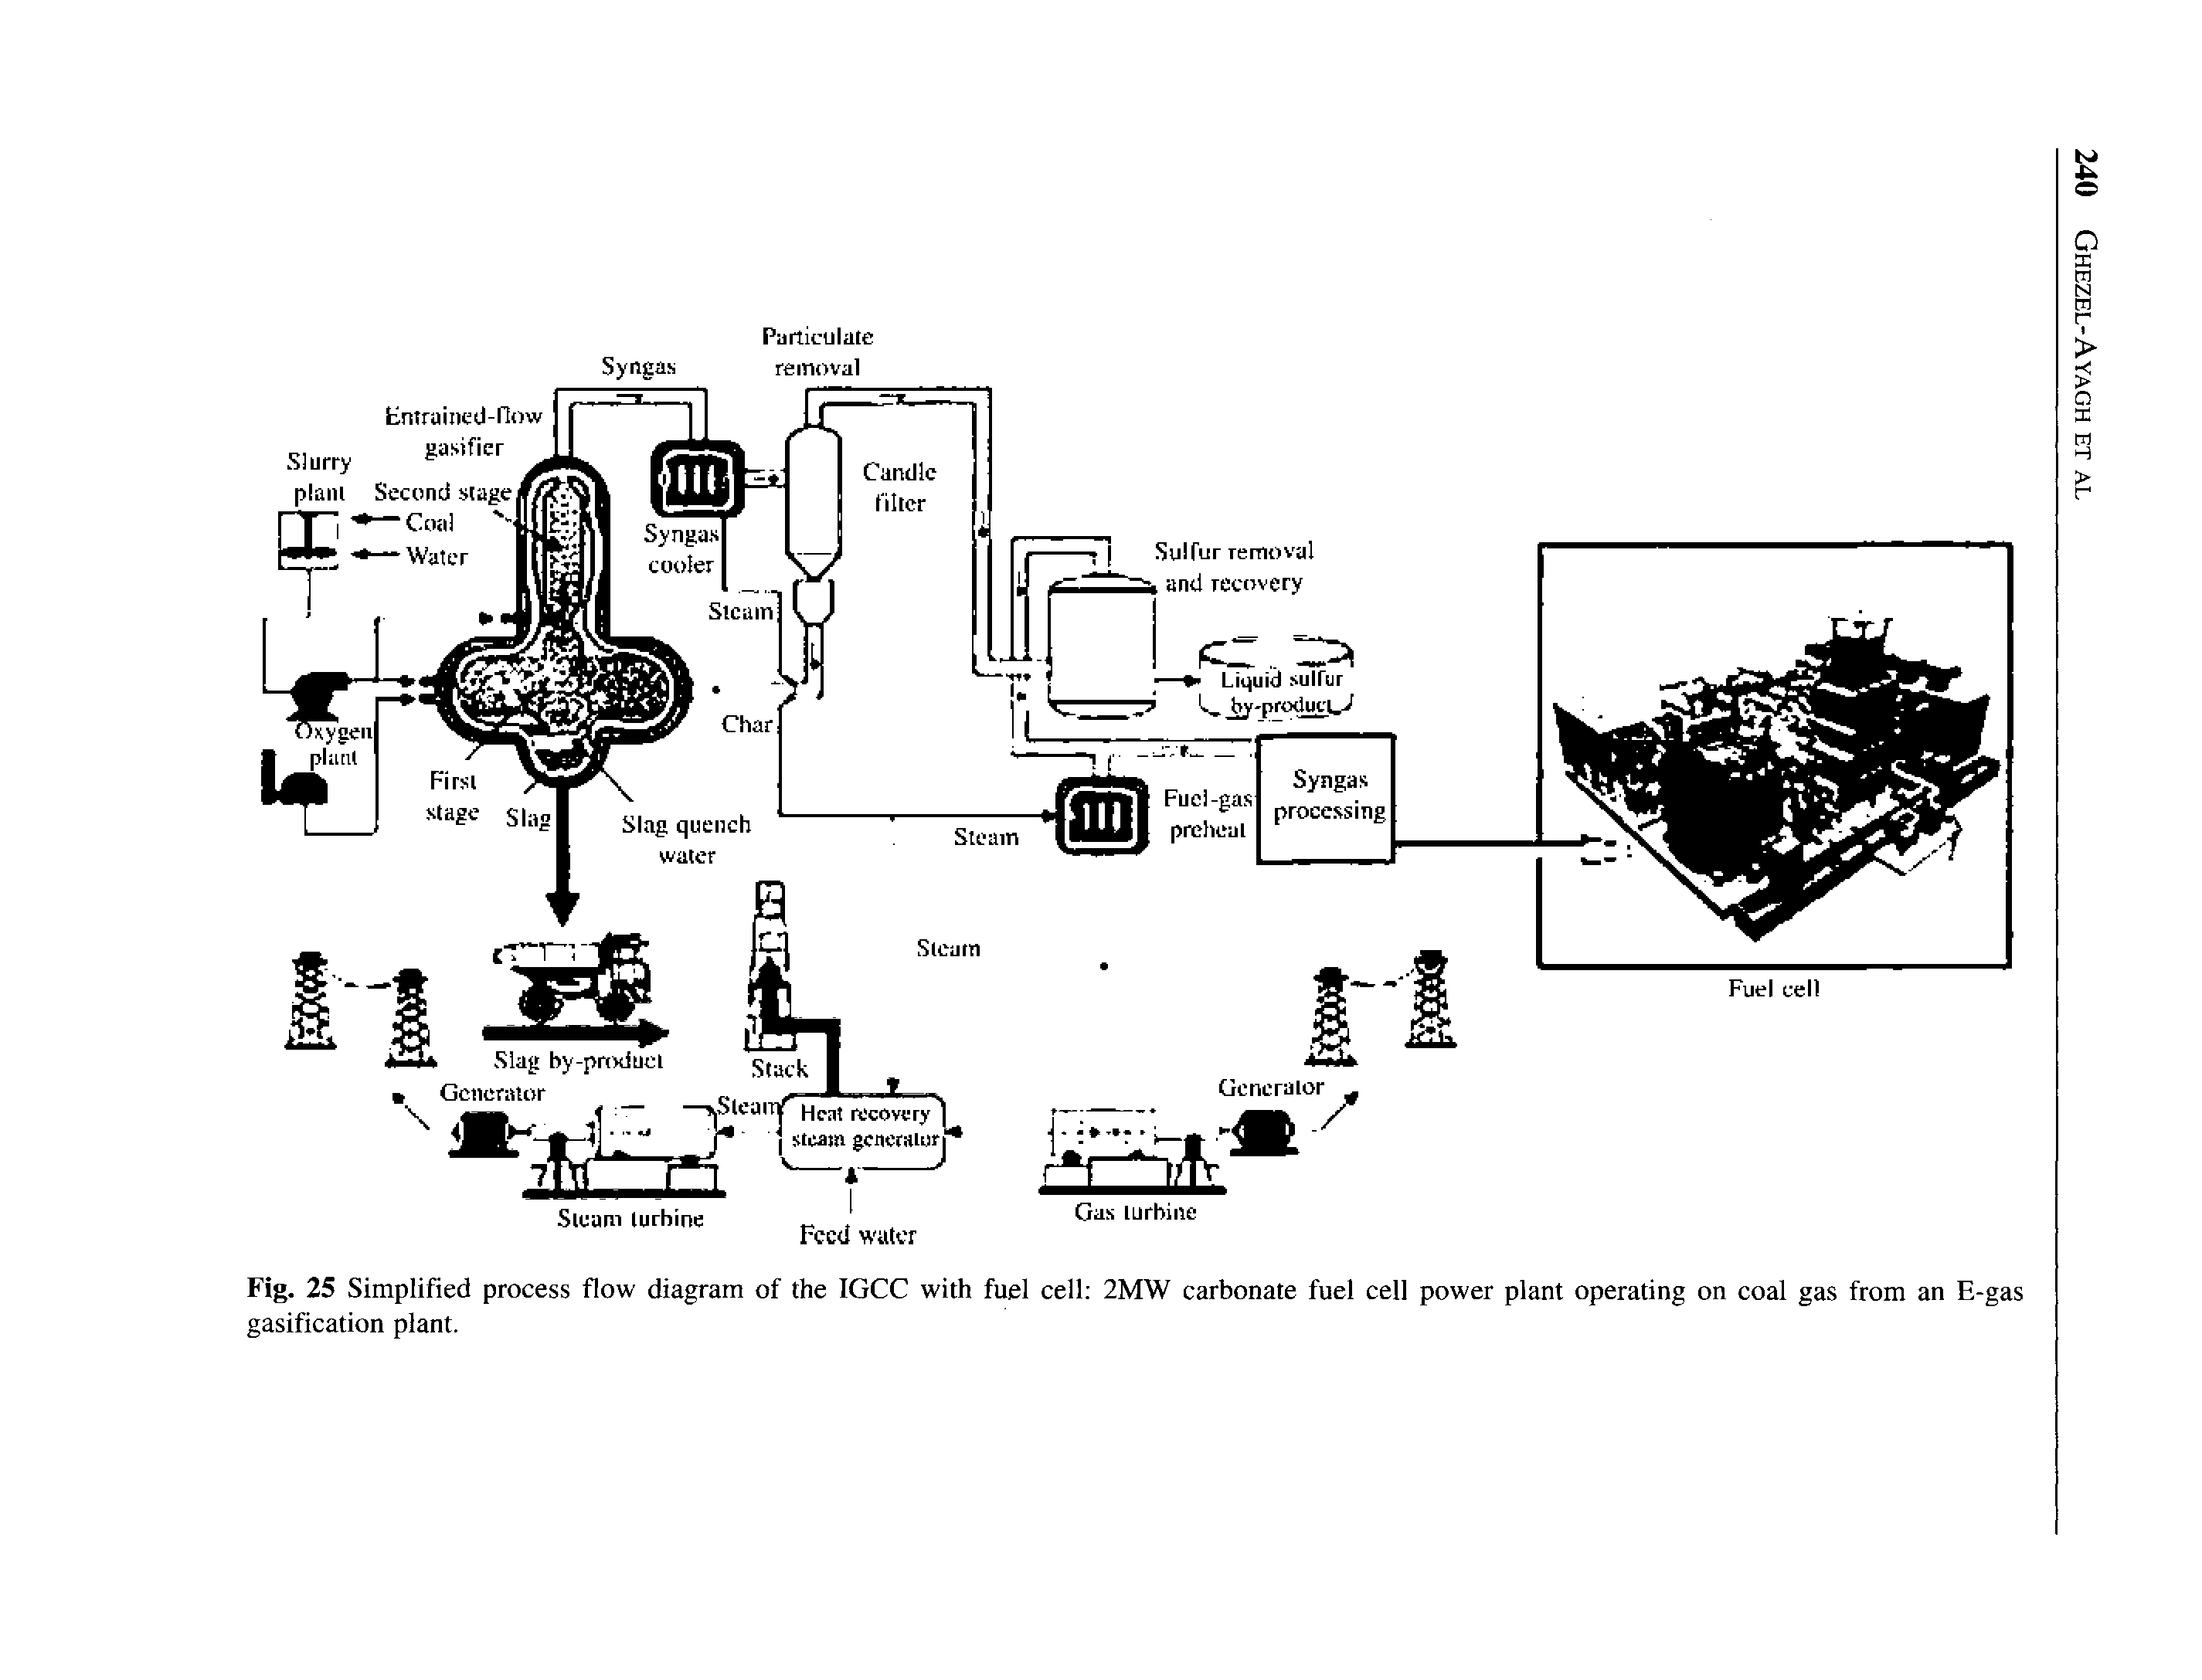 Fig. 25 Simplified process flow diagram of the IGCC with fuel cell 2MW carbonate fuel cell power plant operating on coal gas from an E-gas gasification plant.